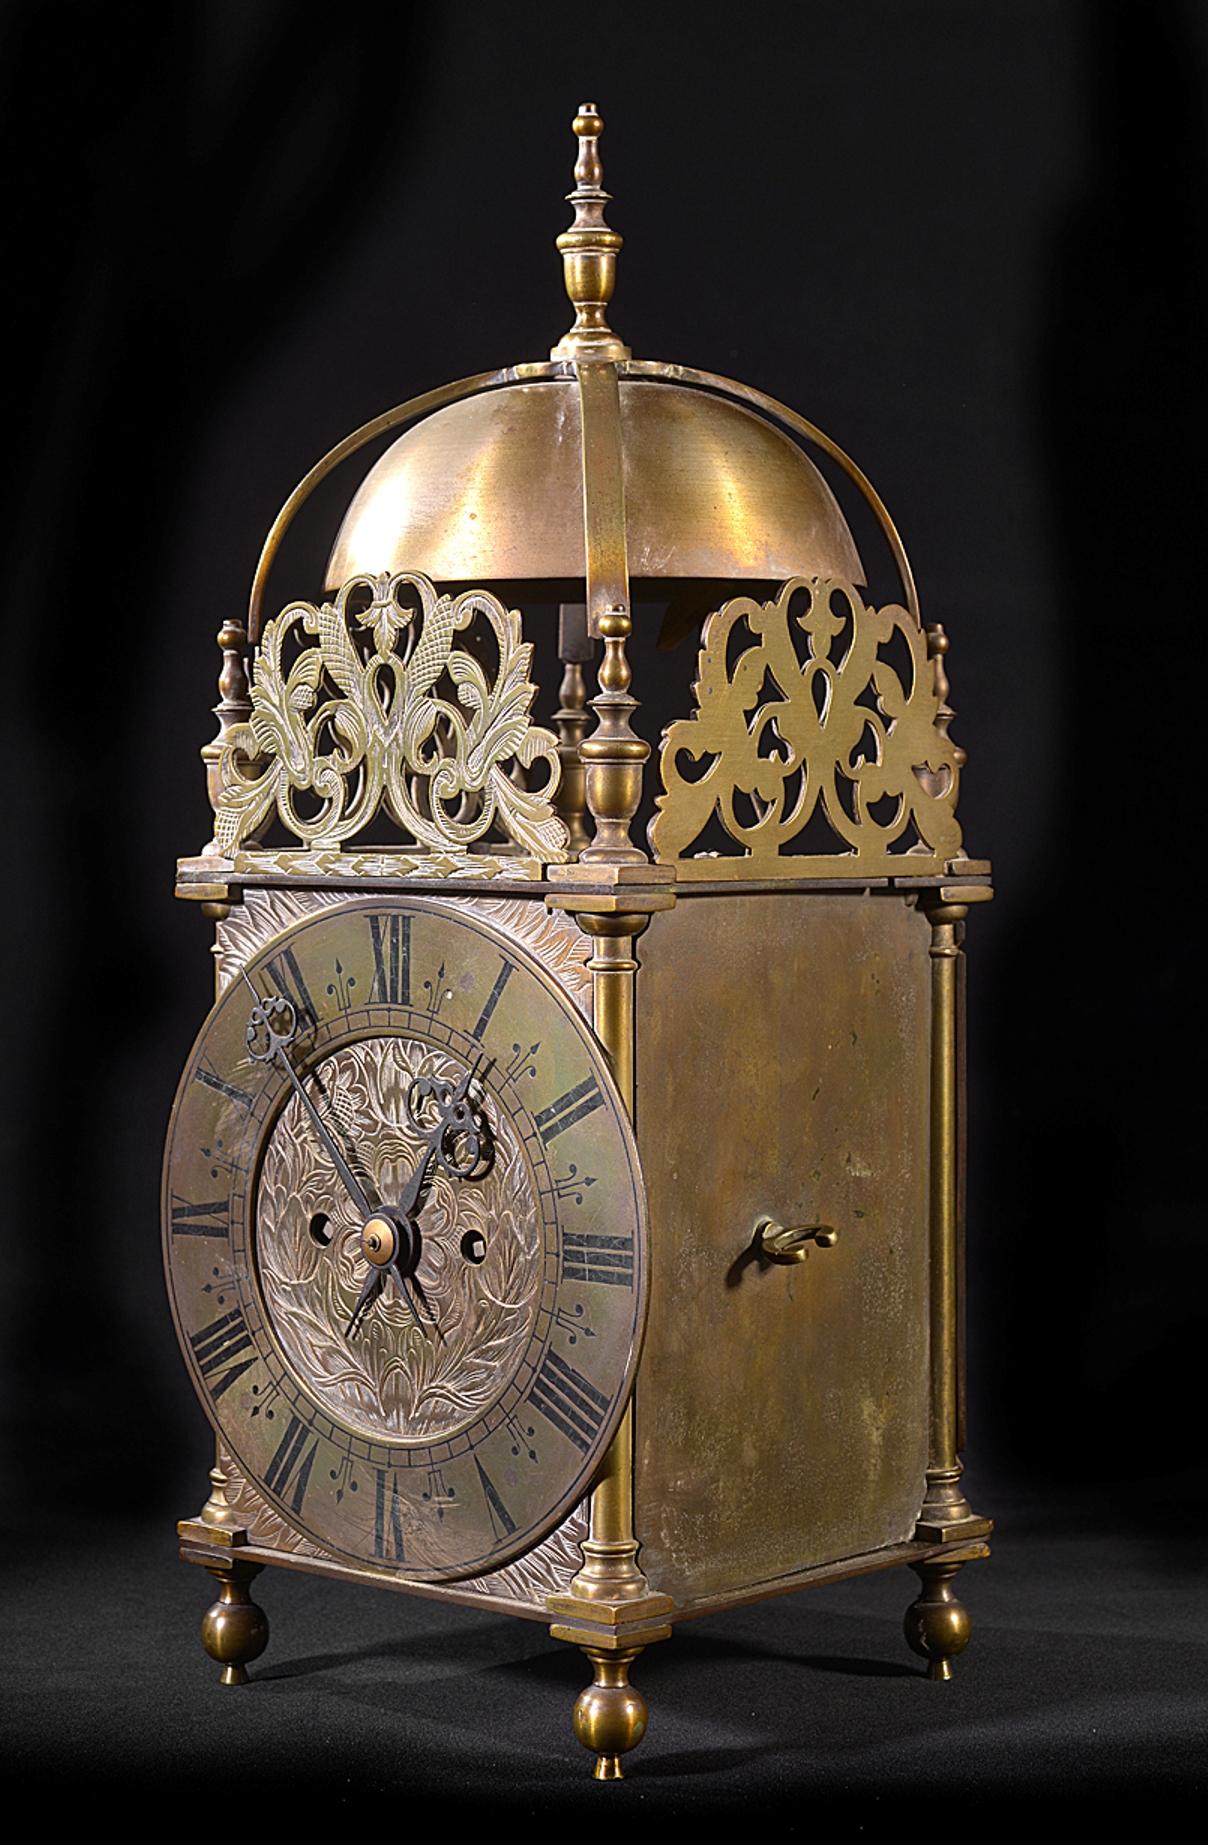 A mid-19th century eight day brass lantern clock with a double fusee movement striking on the hour and half hour.
The brass chapter ring with engraved and black enameled Roman numerals.
The whole with pierced frets and turned corner columns,